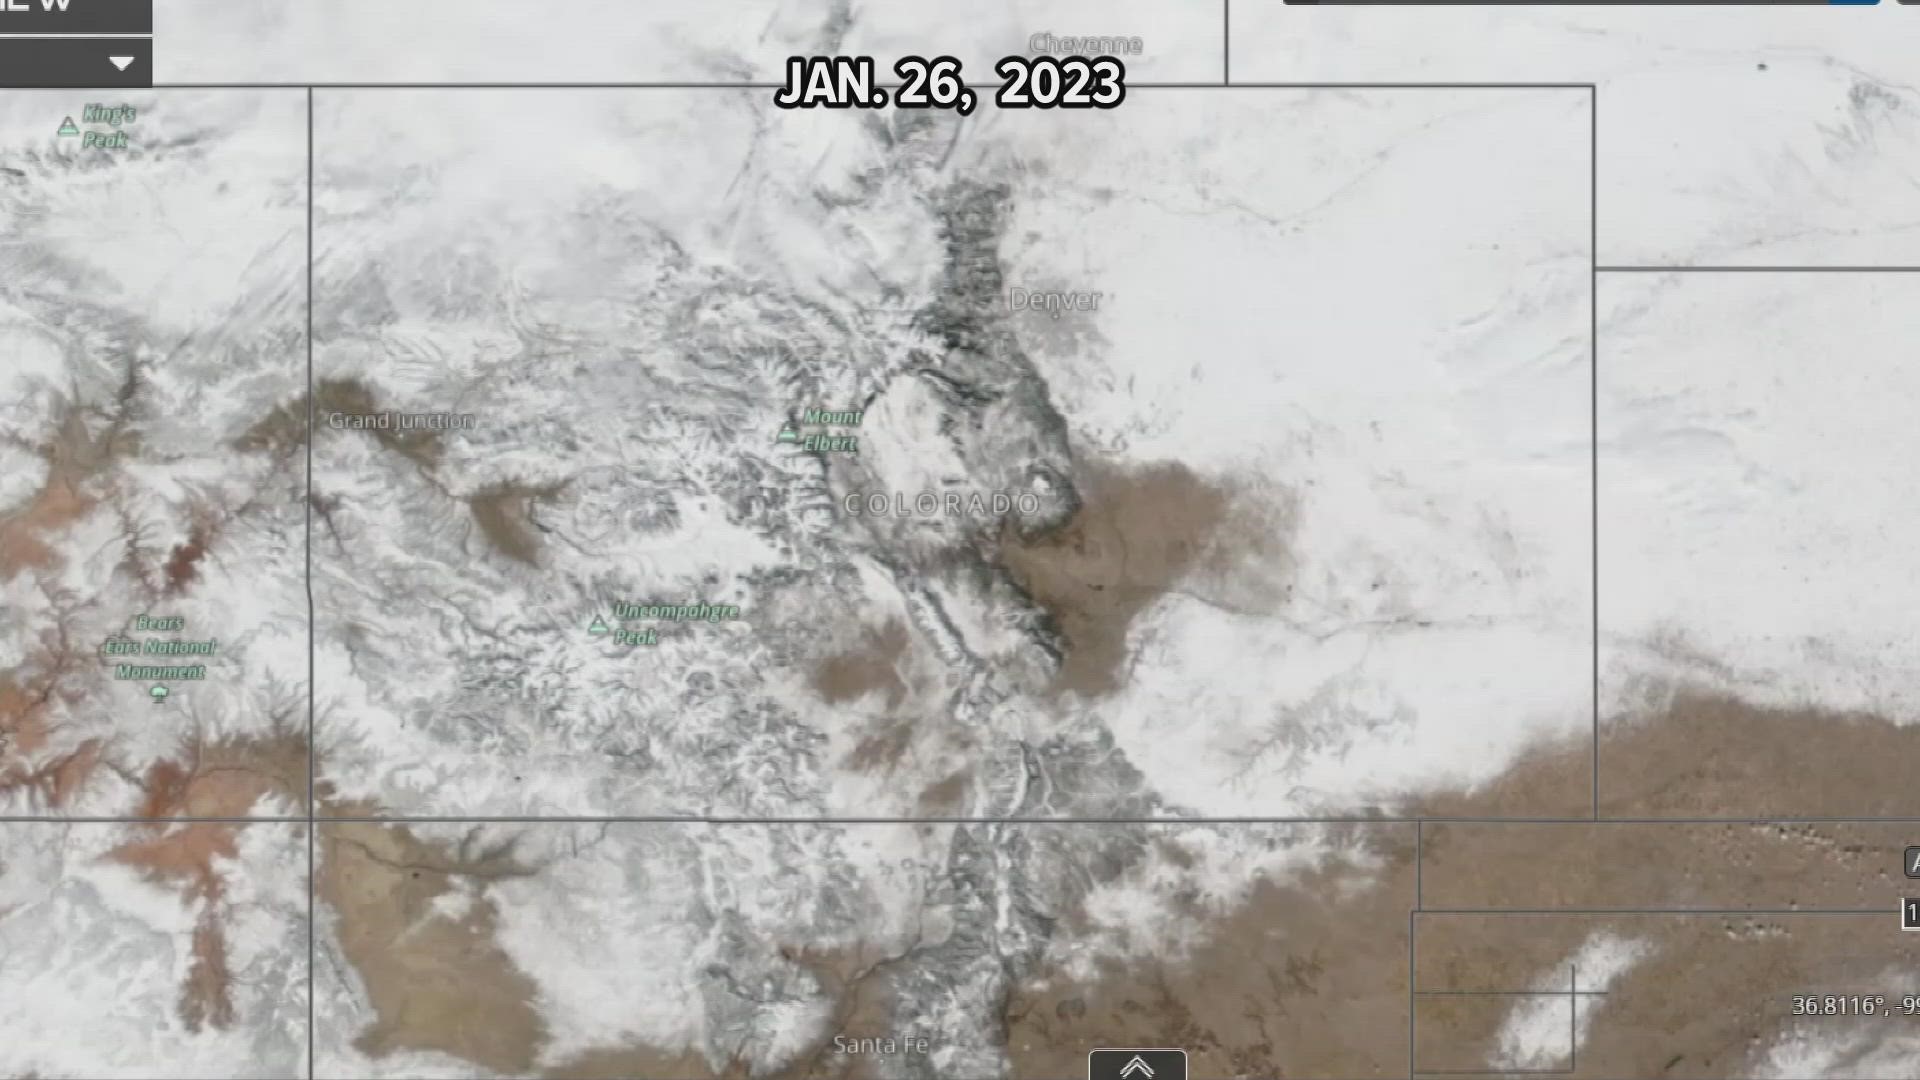 Meteorologist Cory Reppenhagen shows us the snowy view from space and explains why some spots in Colorado are actually still a little brown.